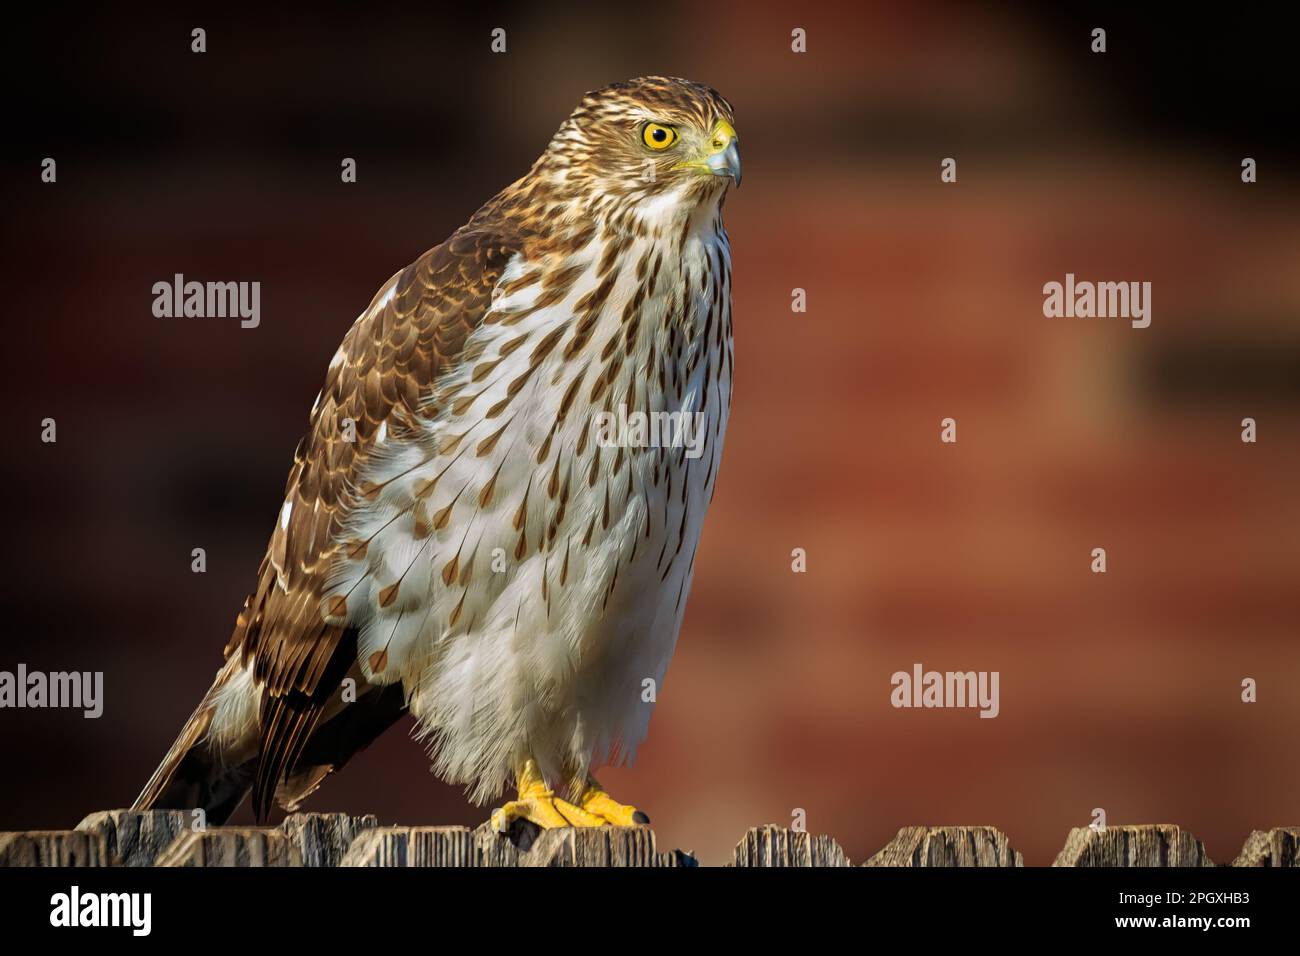 A juvenile Cooper's Hawk sitting on a backyard fence Stock Photo